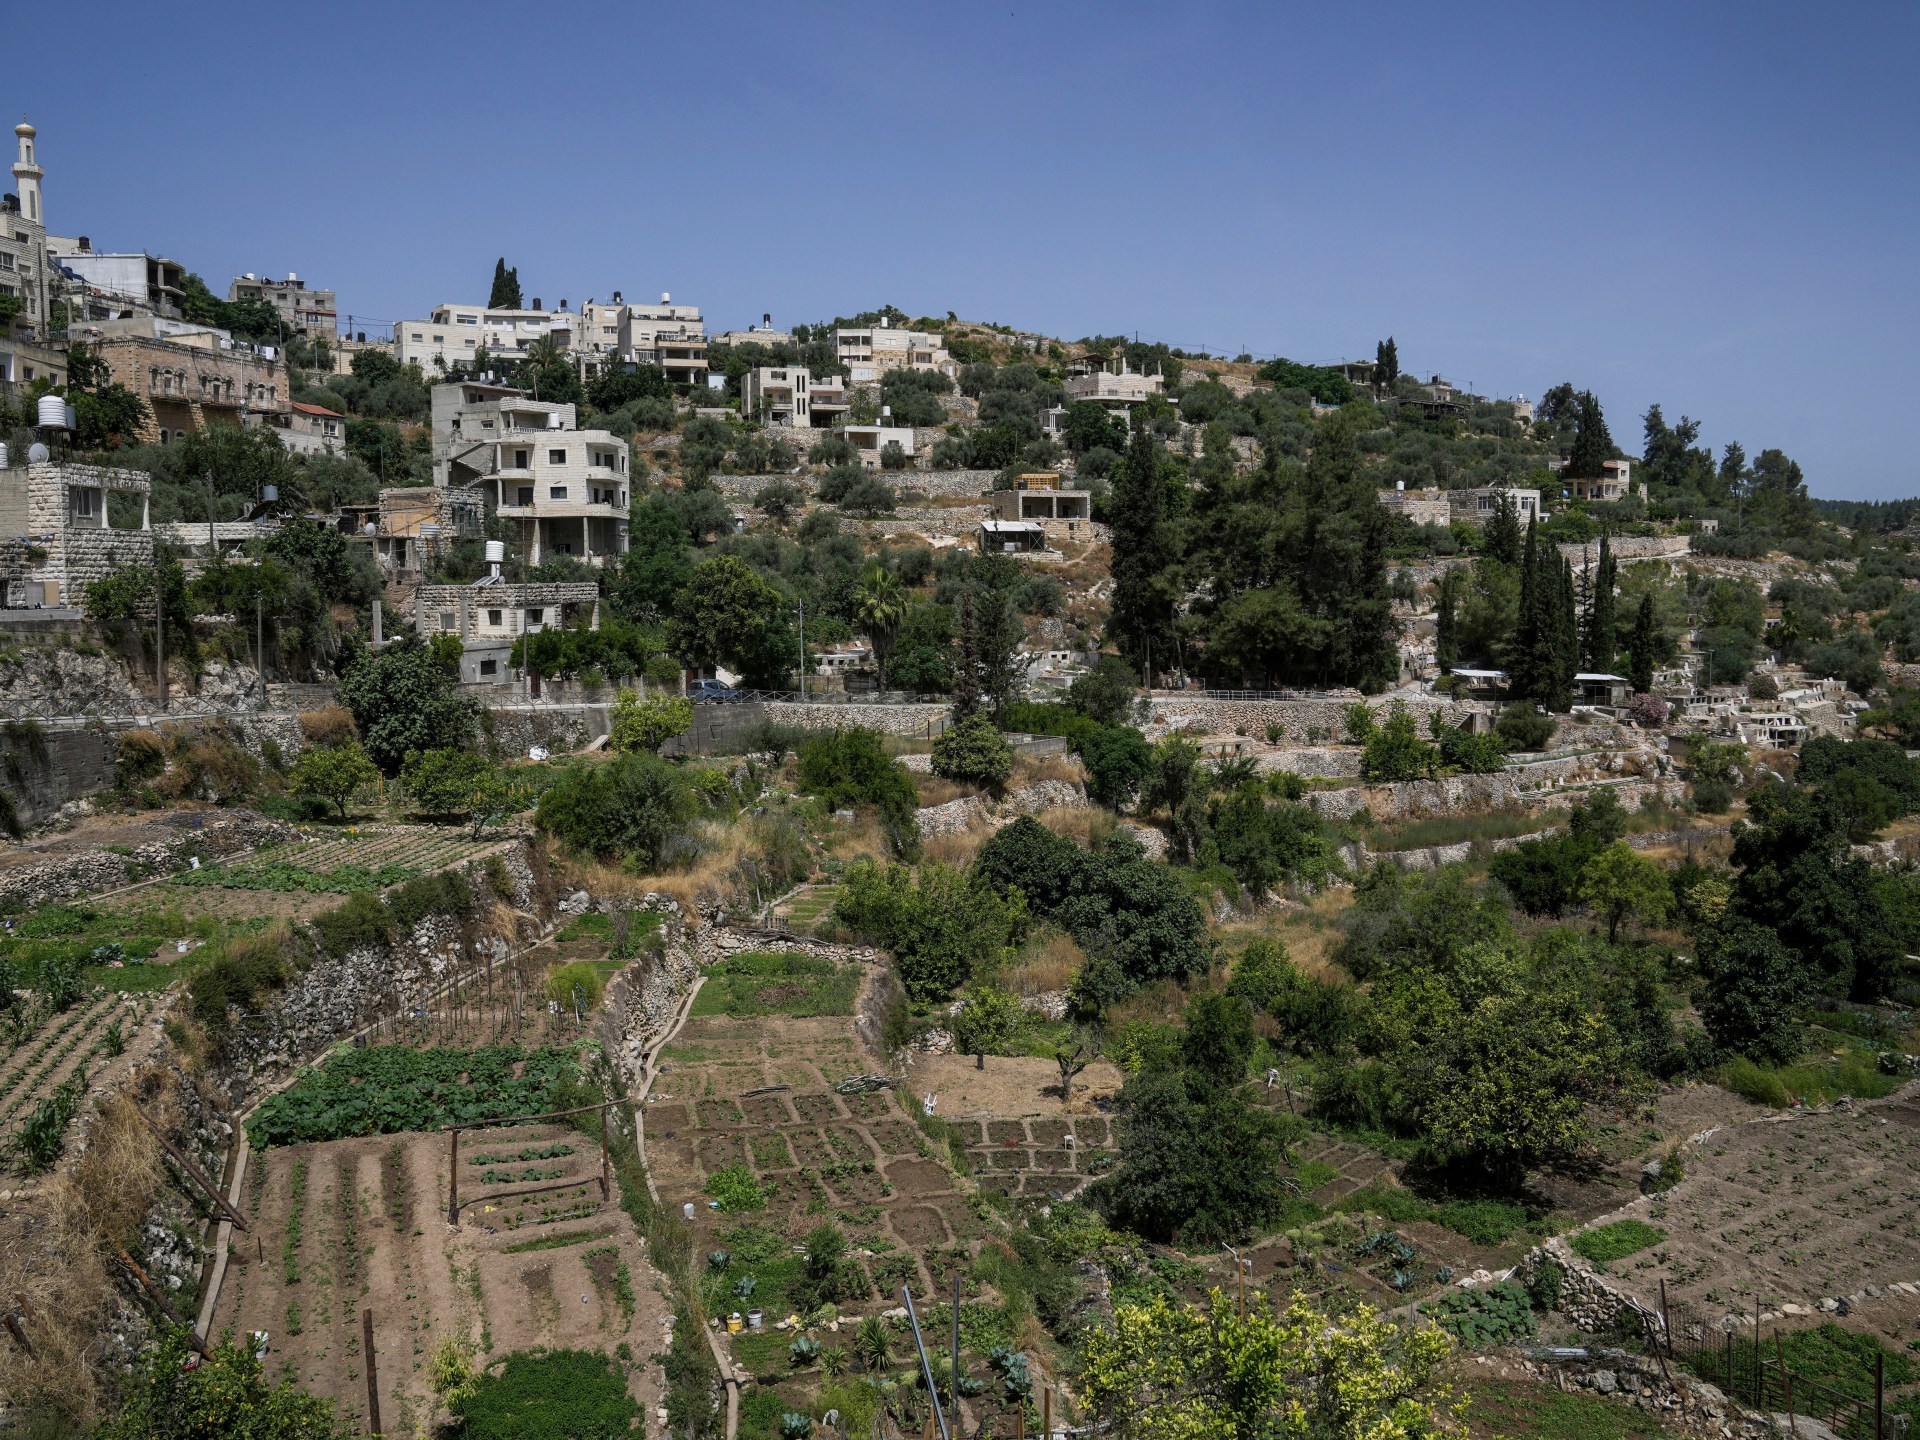 In West Bank, Israel continues to hold back Palestinian development | Israel-Palestine conflict